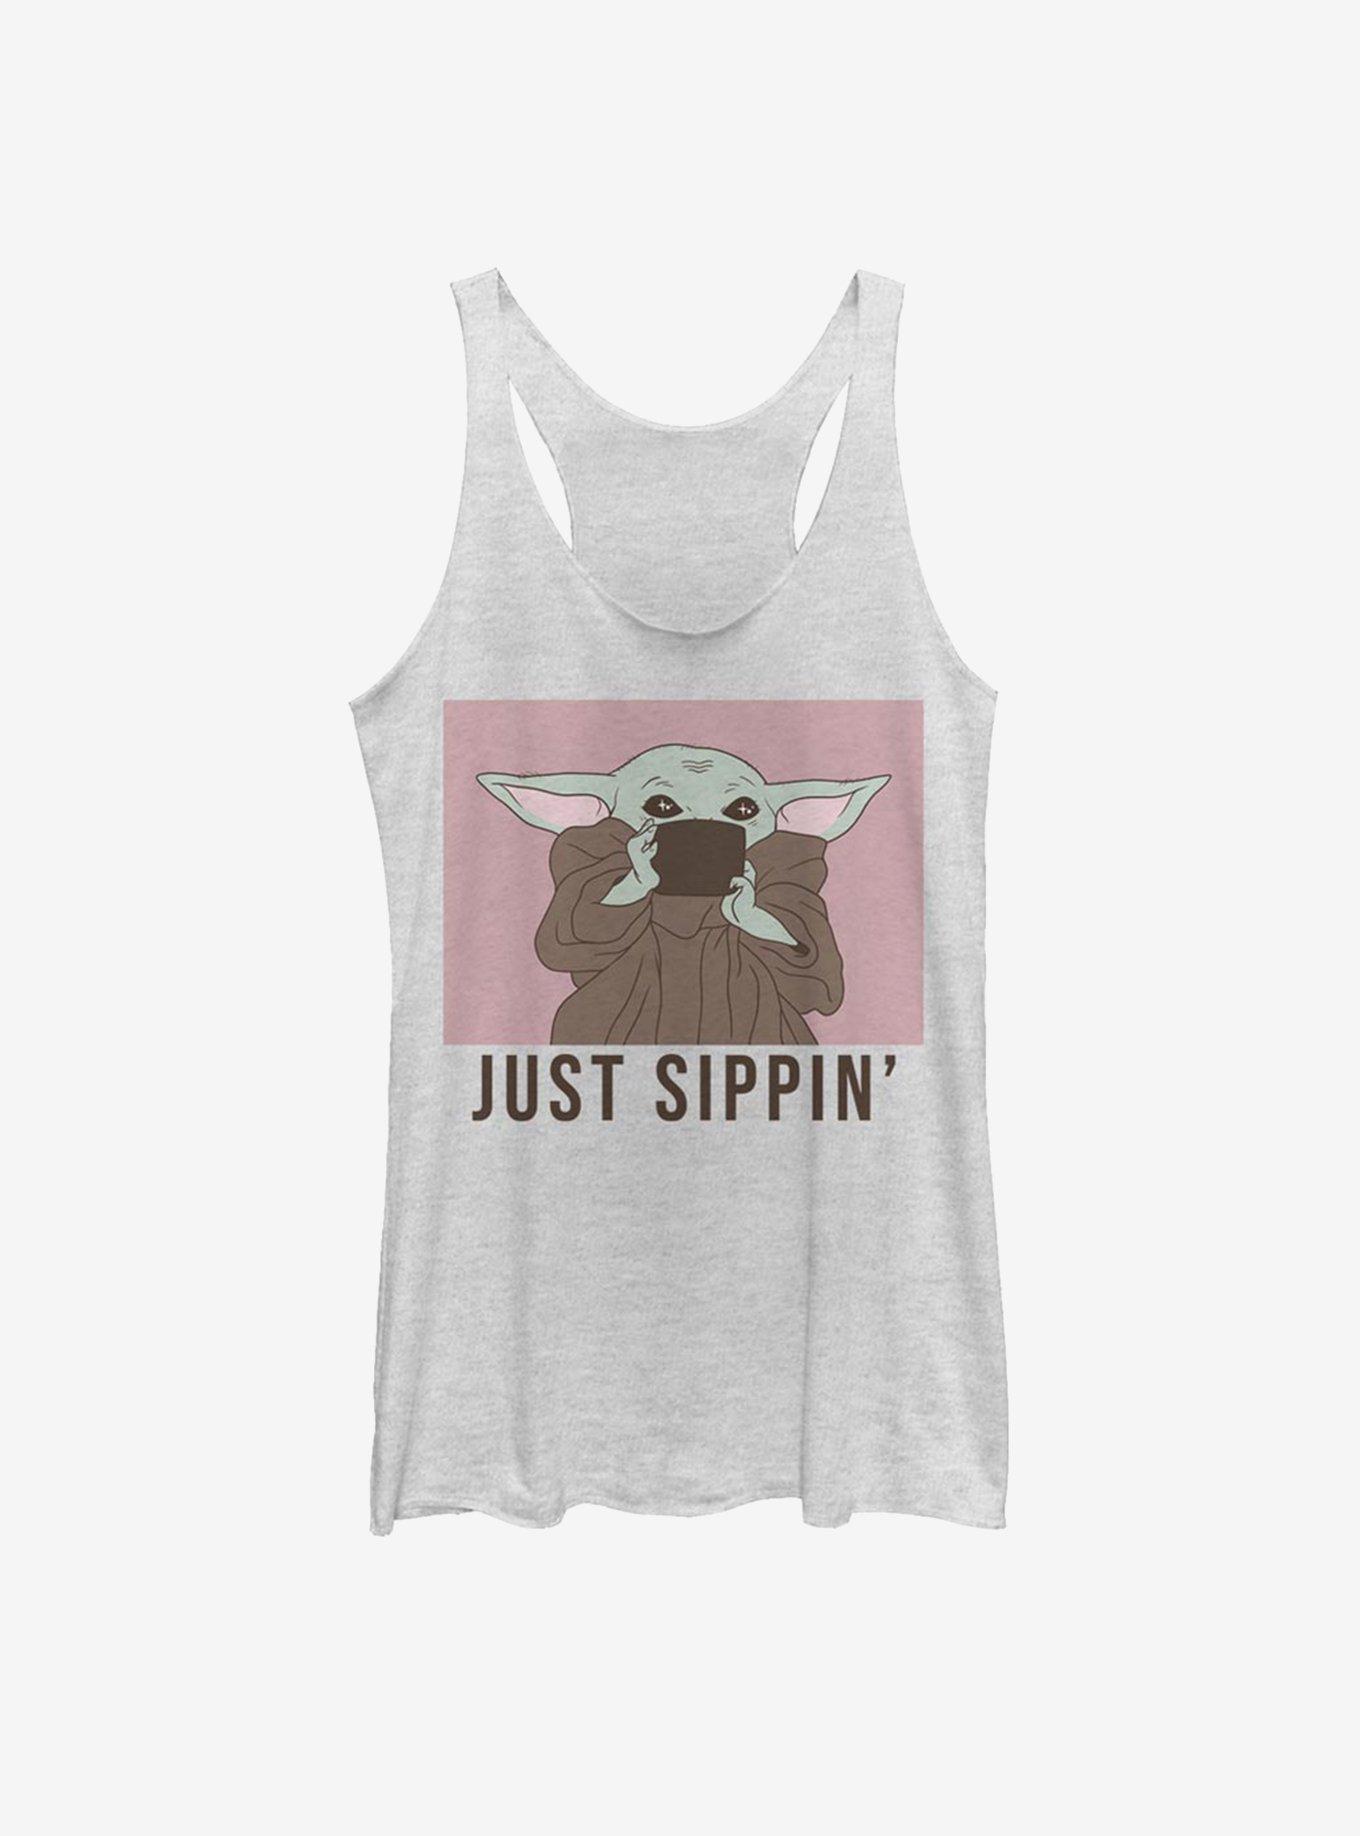 Star Wars The Mandalorian The Child Just Sippin' Womens Tank Top, WHITE HTR, hi-res